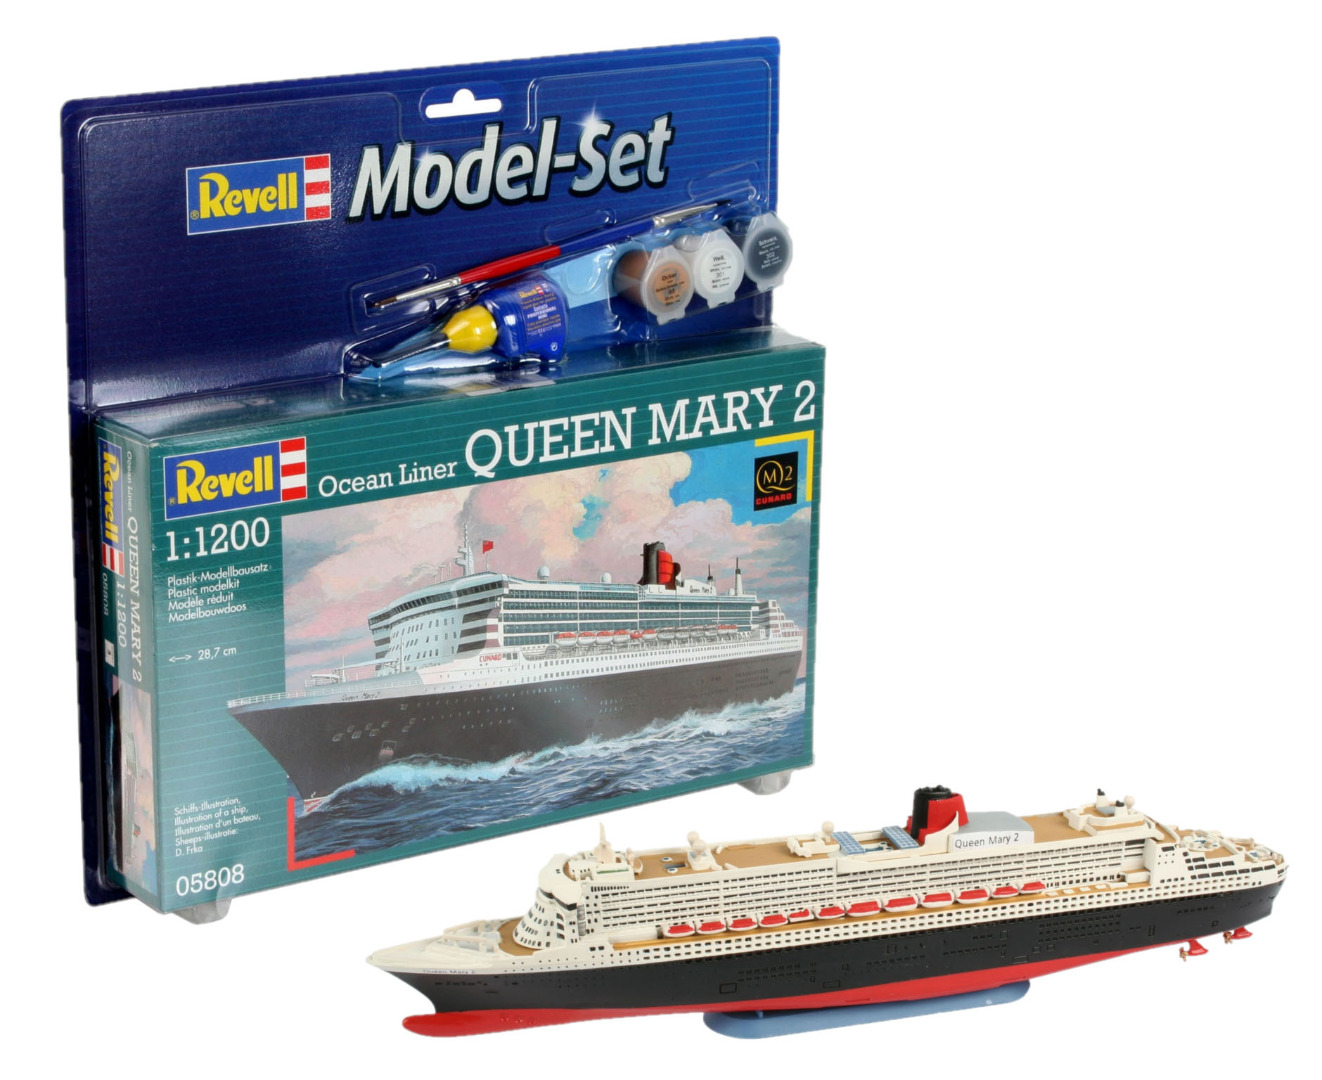 Revell Model Set Queen Mary 2 Scale 1:1200